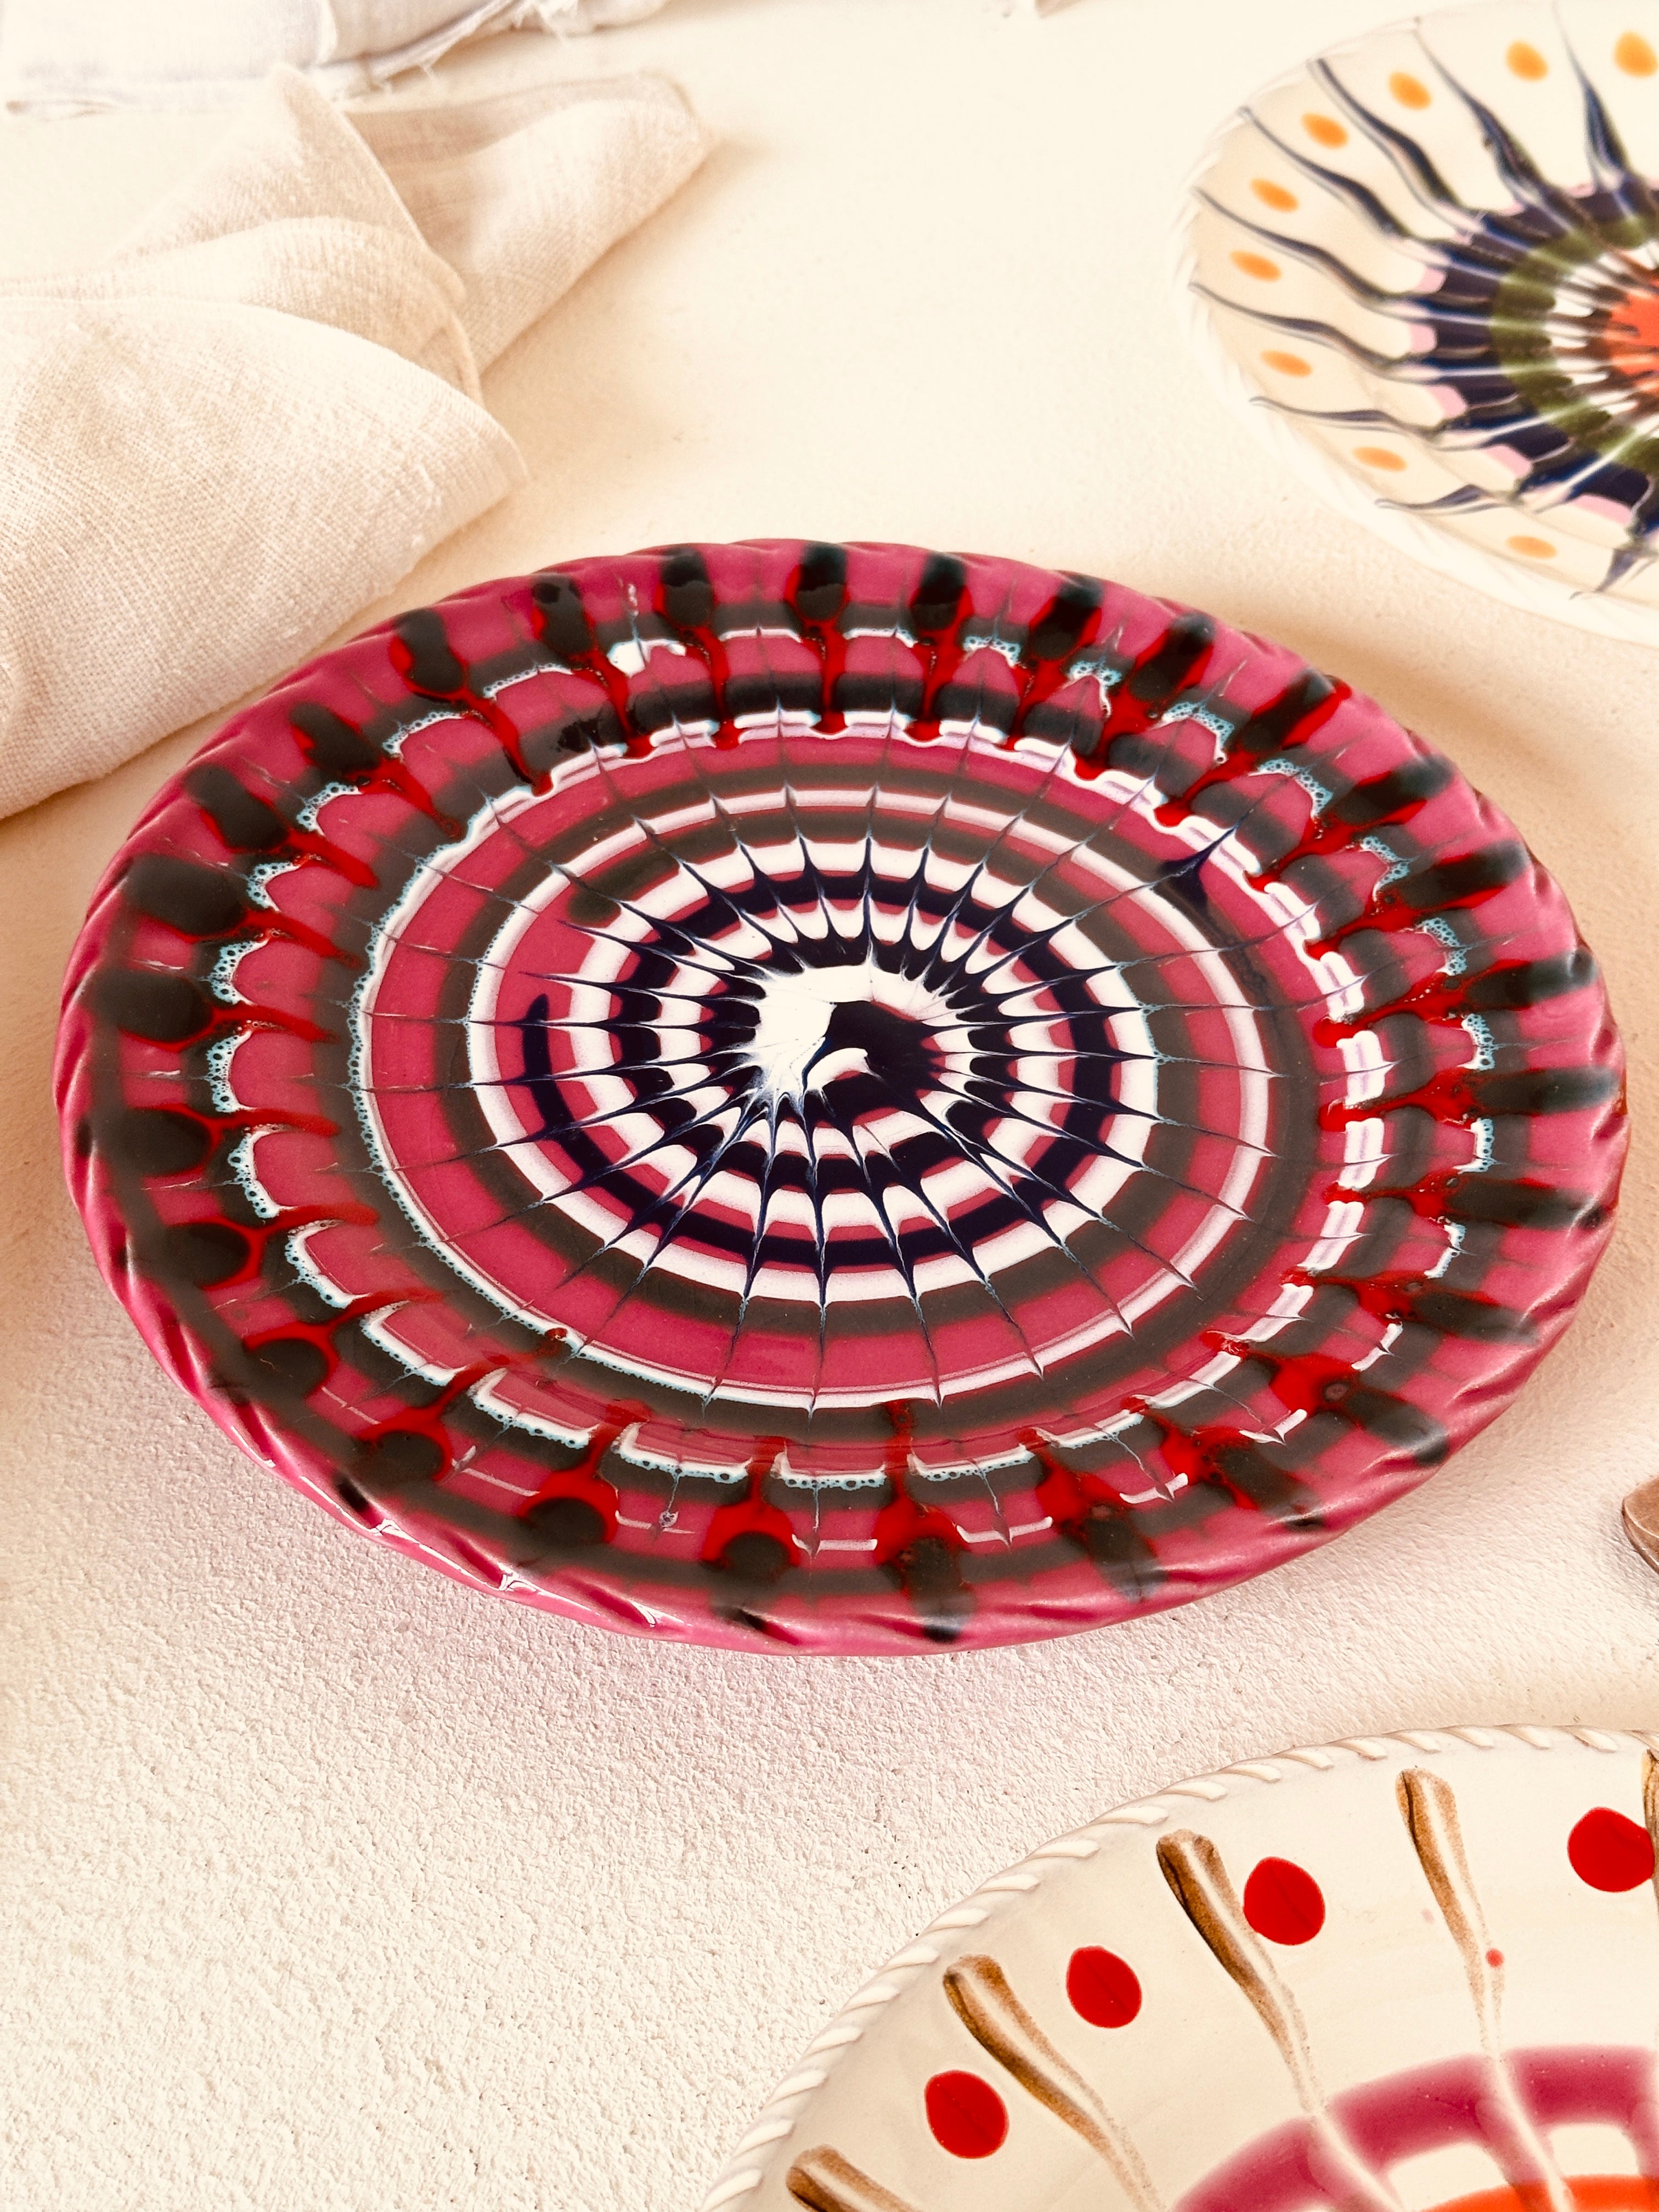 Psychodelic Dinner Plate "Fuxia Classic"